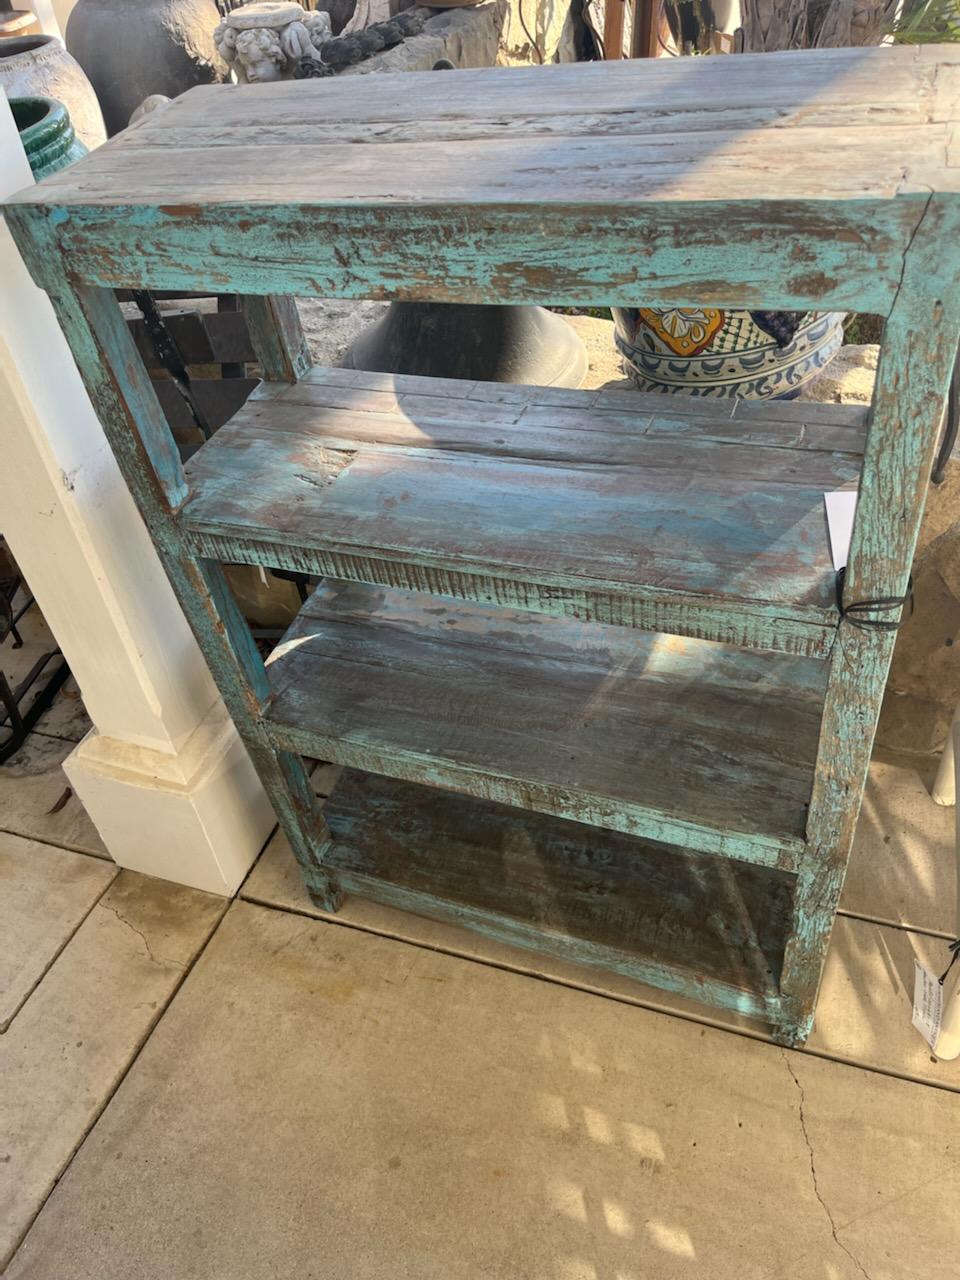 19thc original powder blue painted surface shelving or farm bucket bench.This southern folk art shelf is in great sturdy condition.